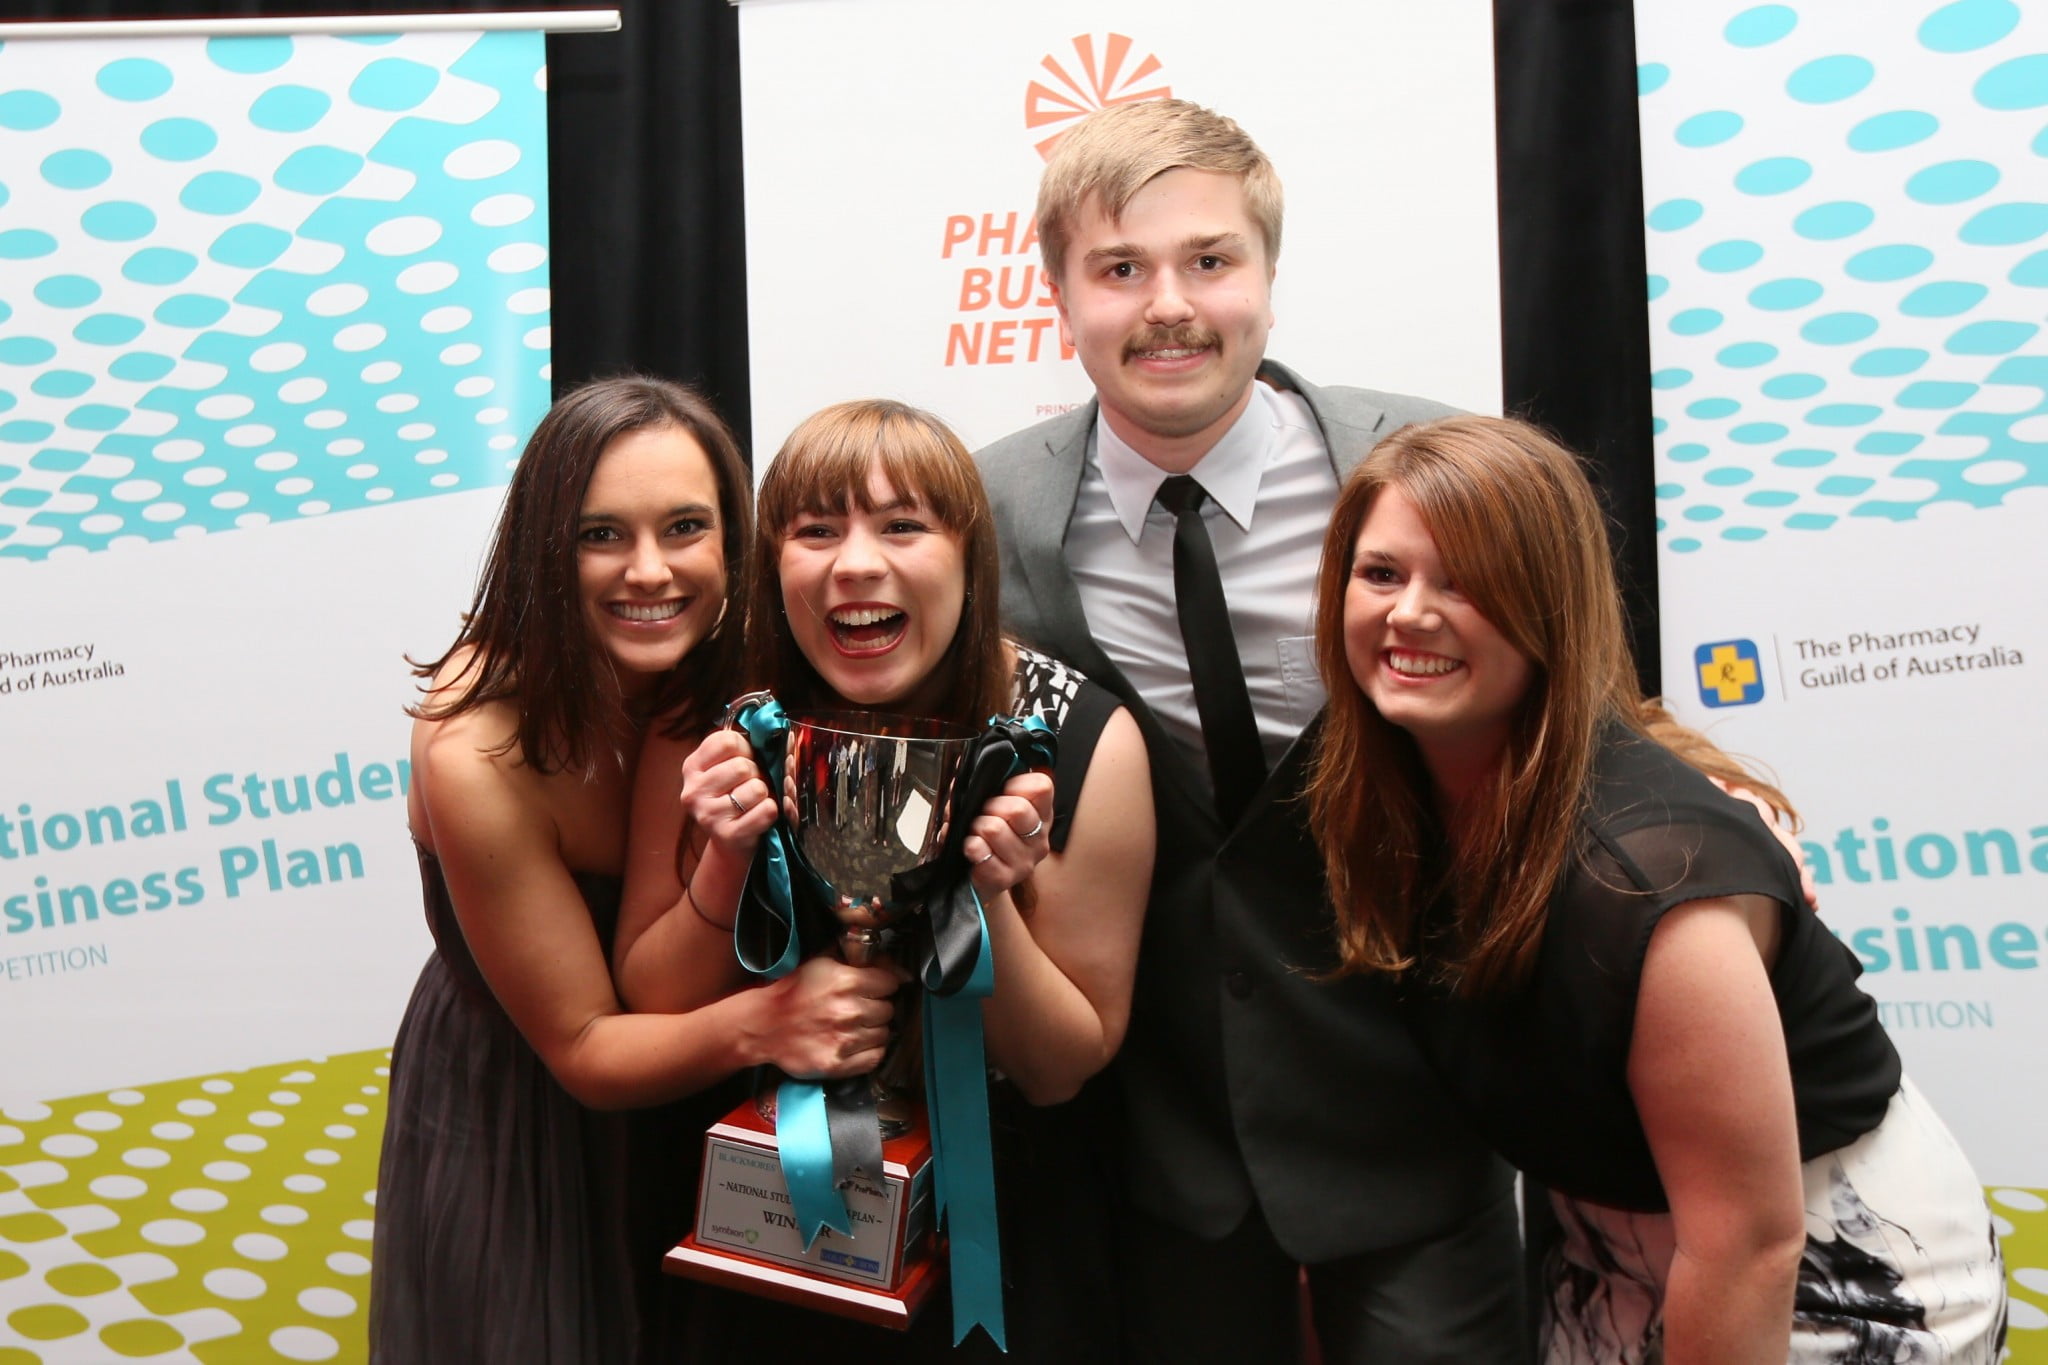 Chanelle Rolls, Lauren Haworth, Mark Jones and Jenna Leighton win the National Pharmacy Business Plan Competition